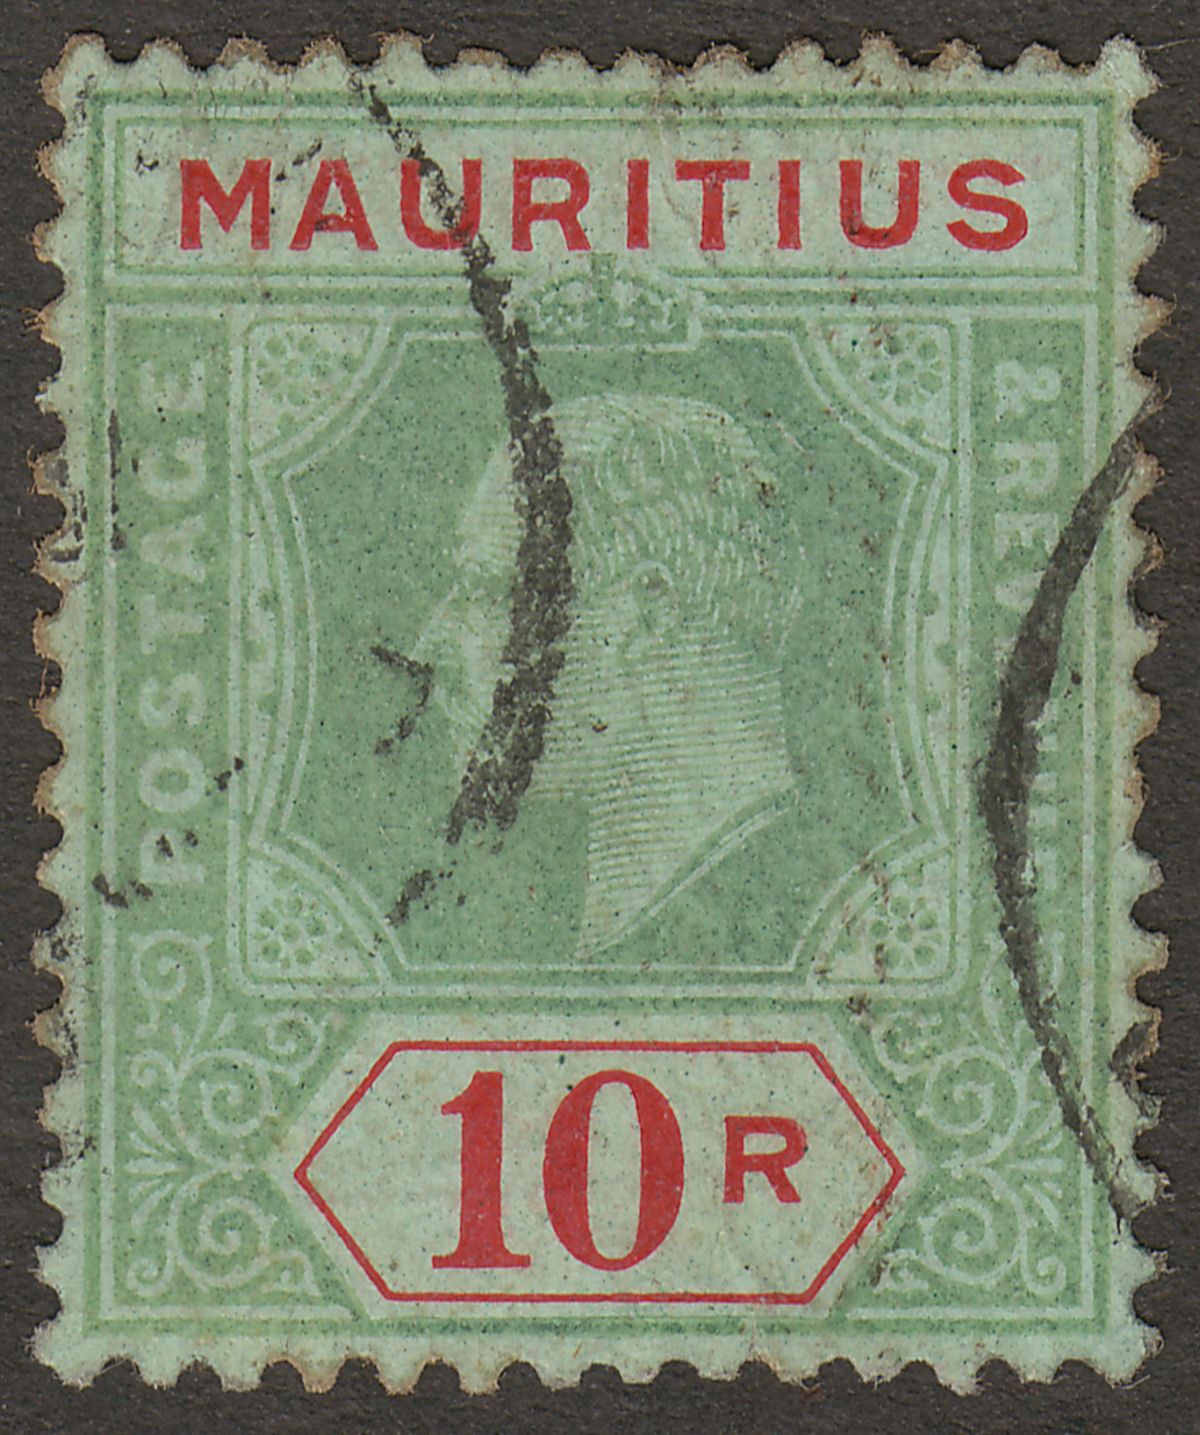 Mauritius 1910 KEVII 10r Green and Red on Green Used SG195 cat £325 faults